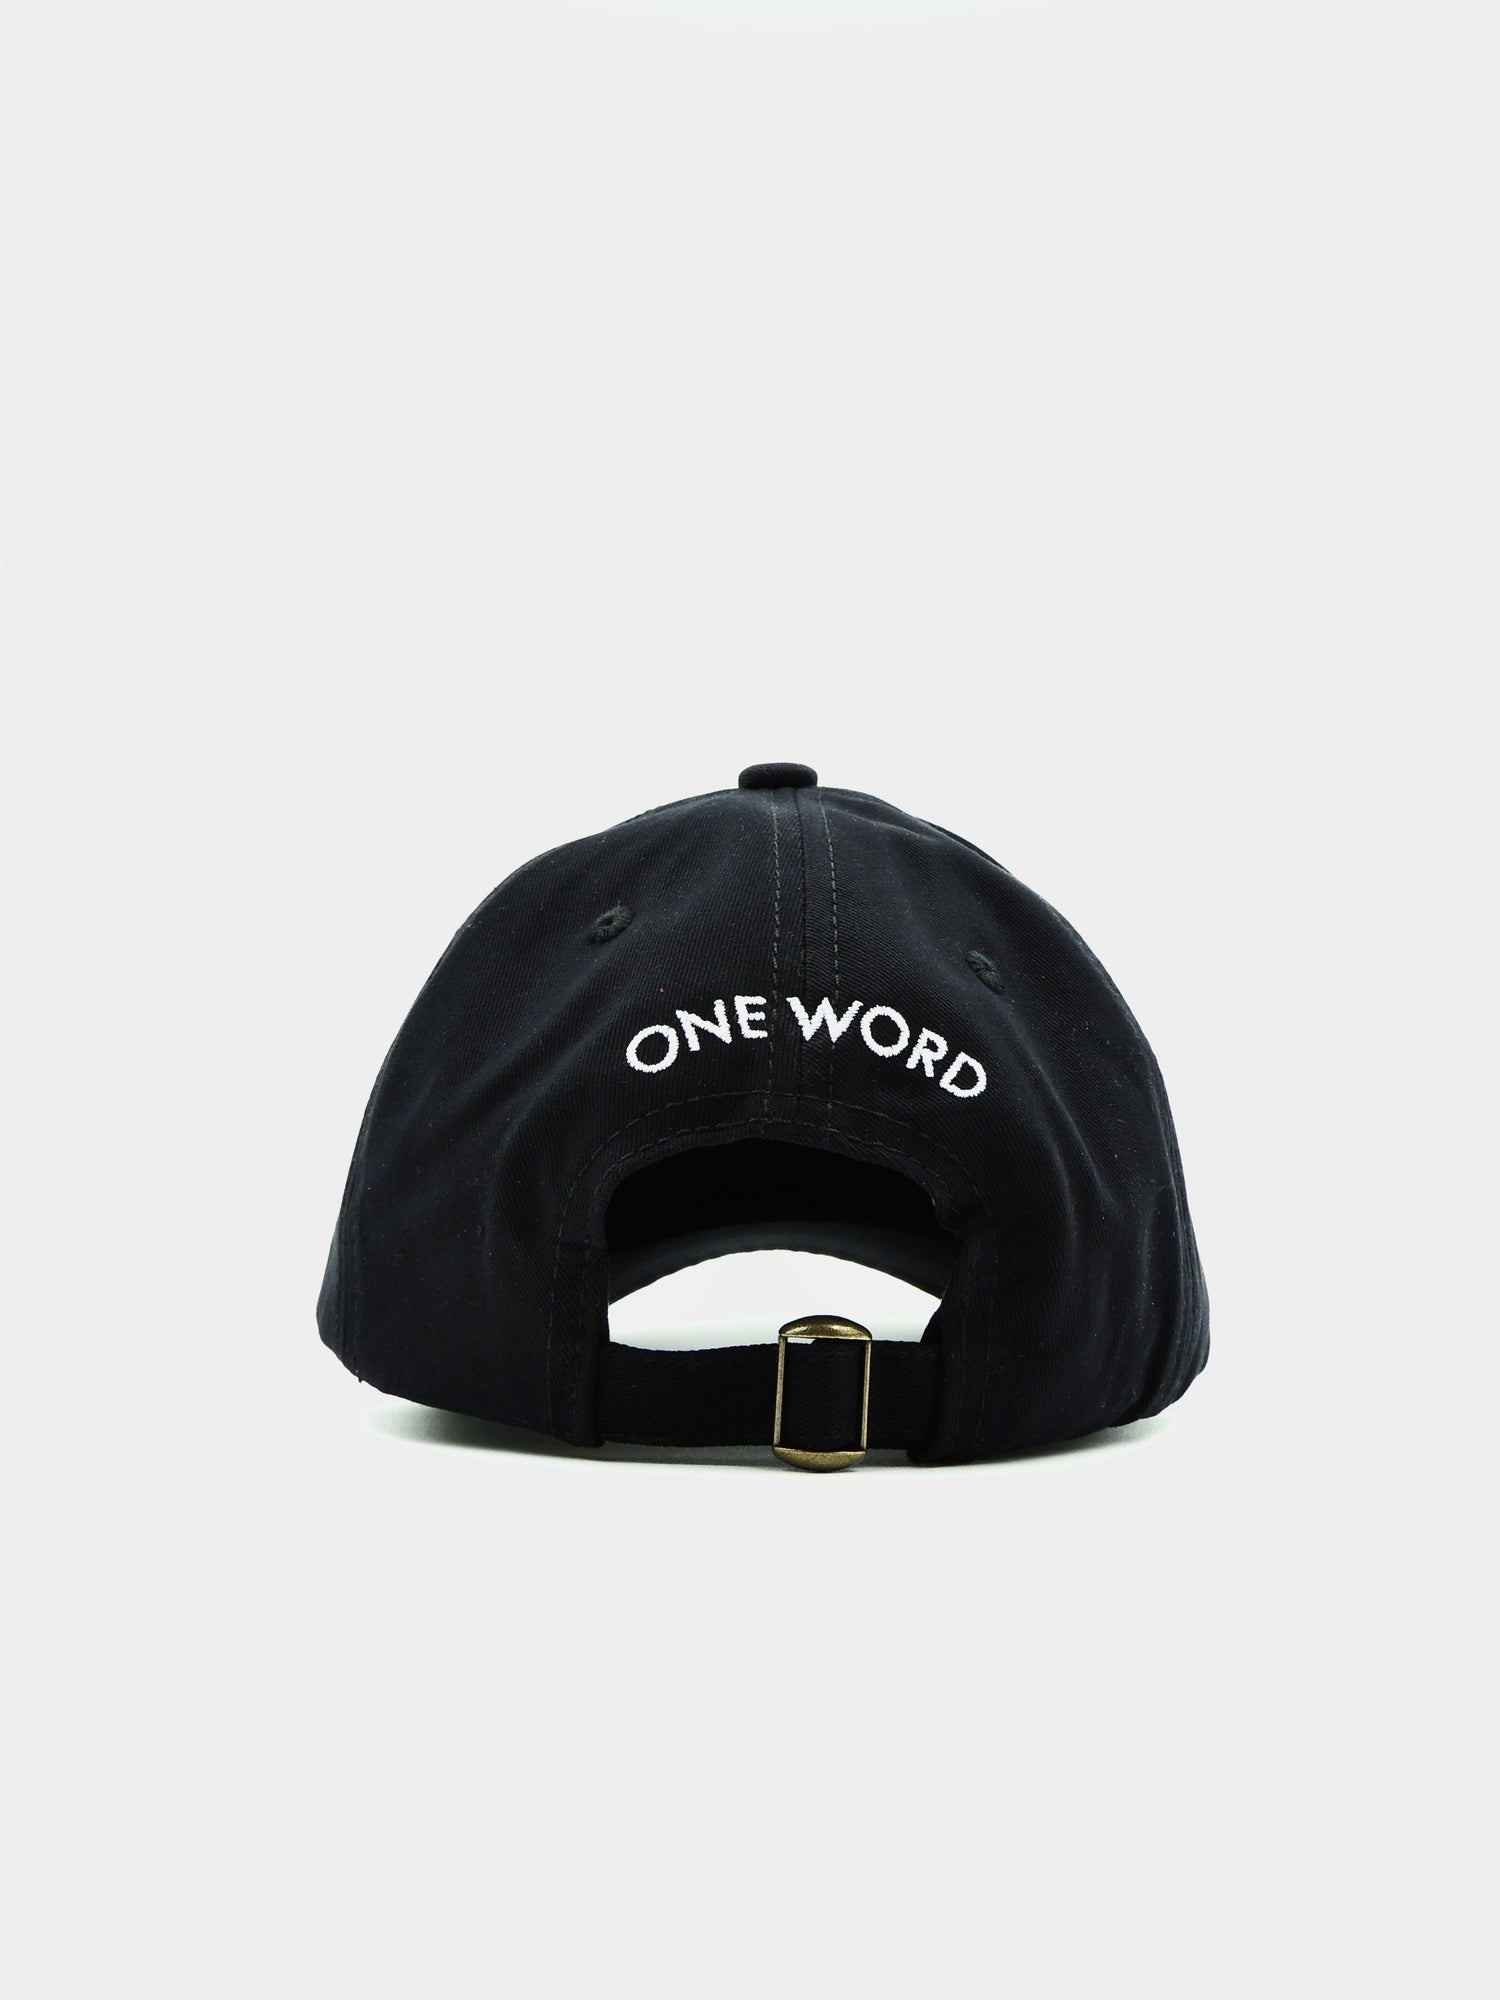 [keyword]-One Word StoreConquer Cap